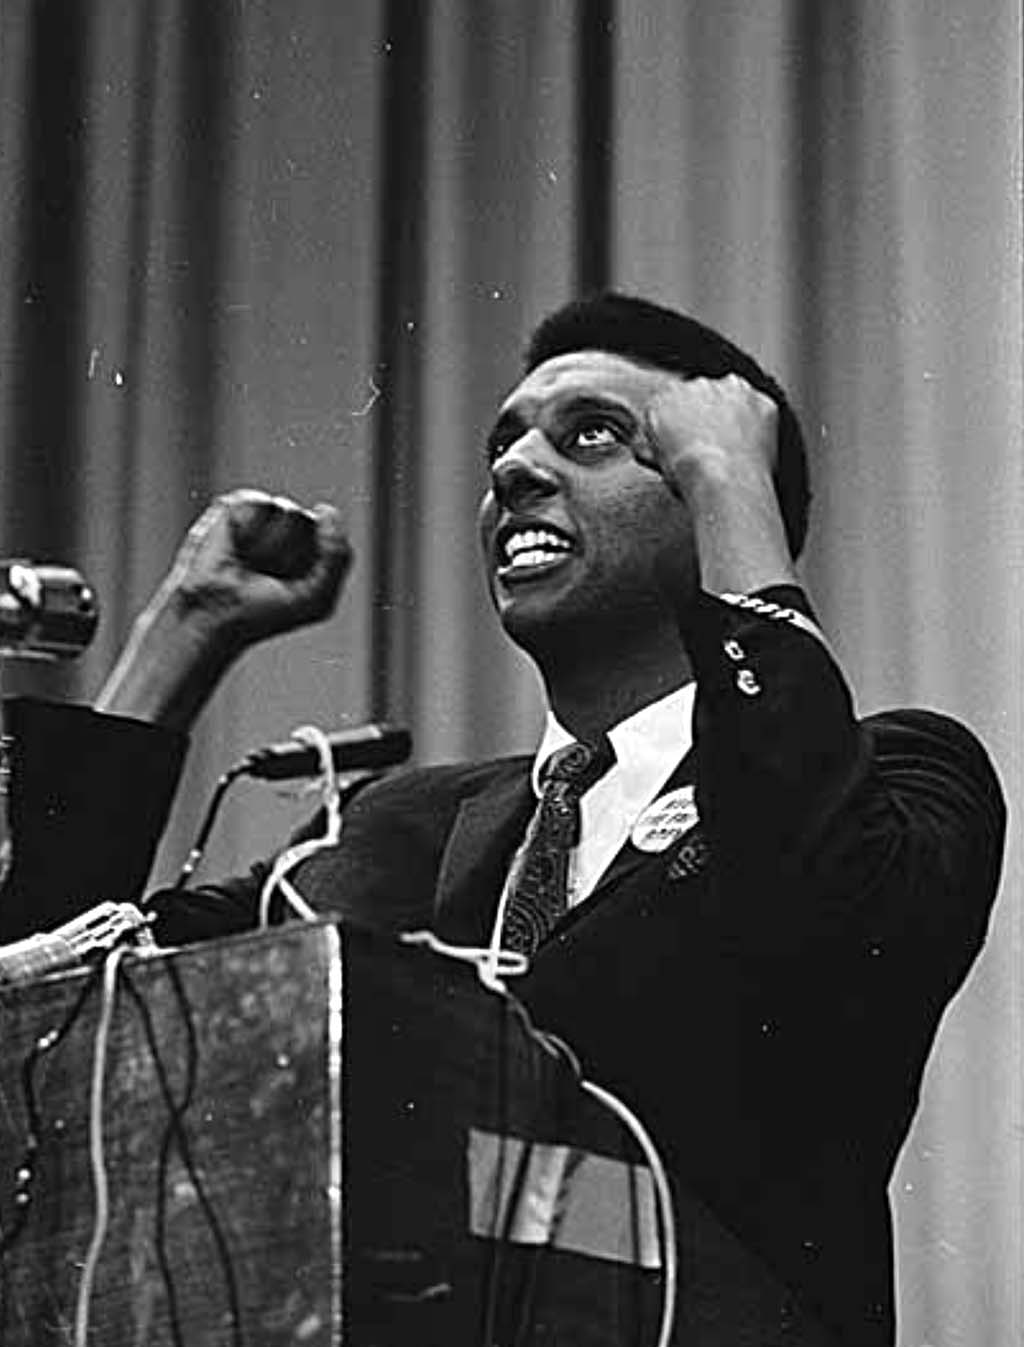 Black Power by Stokely Carmichael